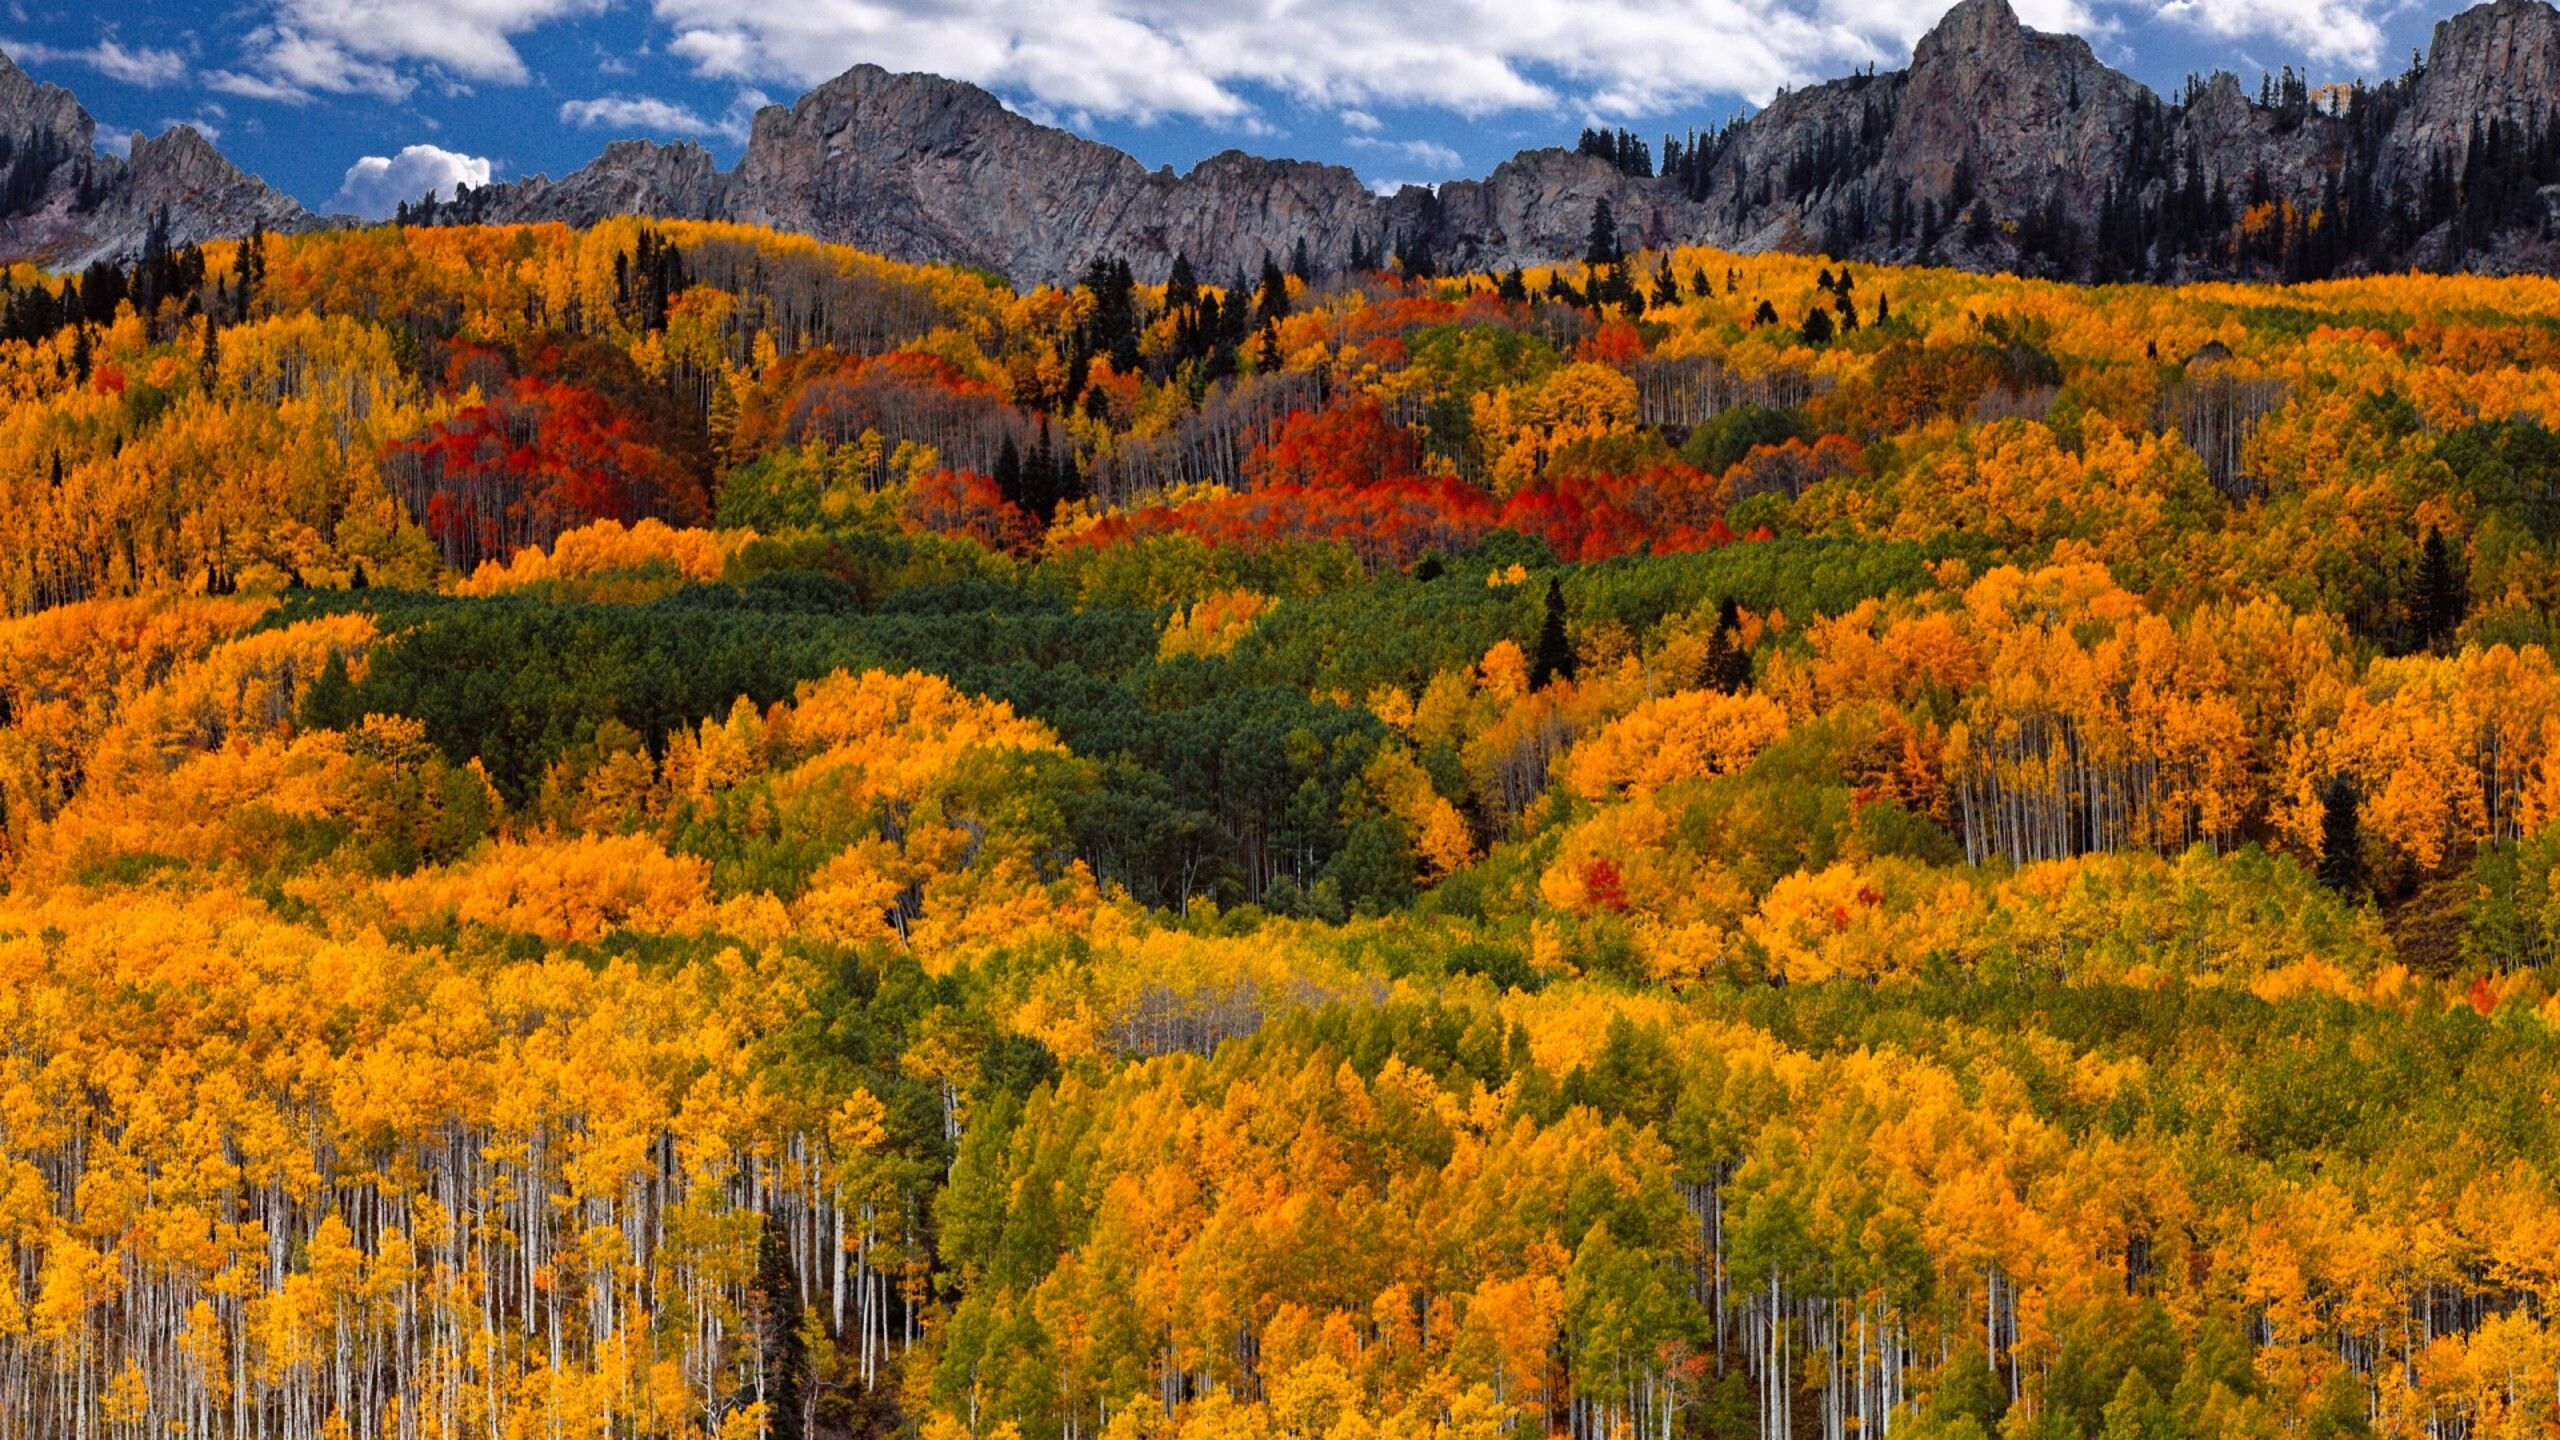 A colorful forest in mountain